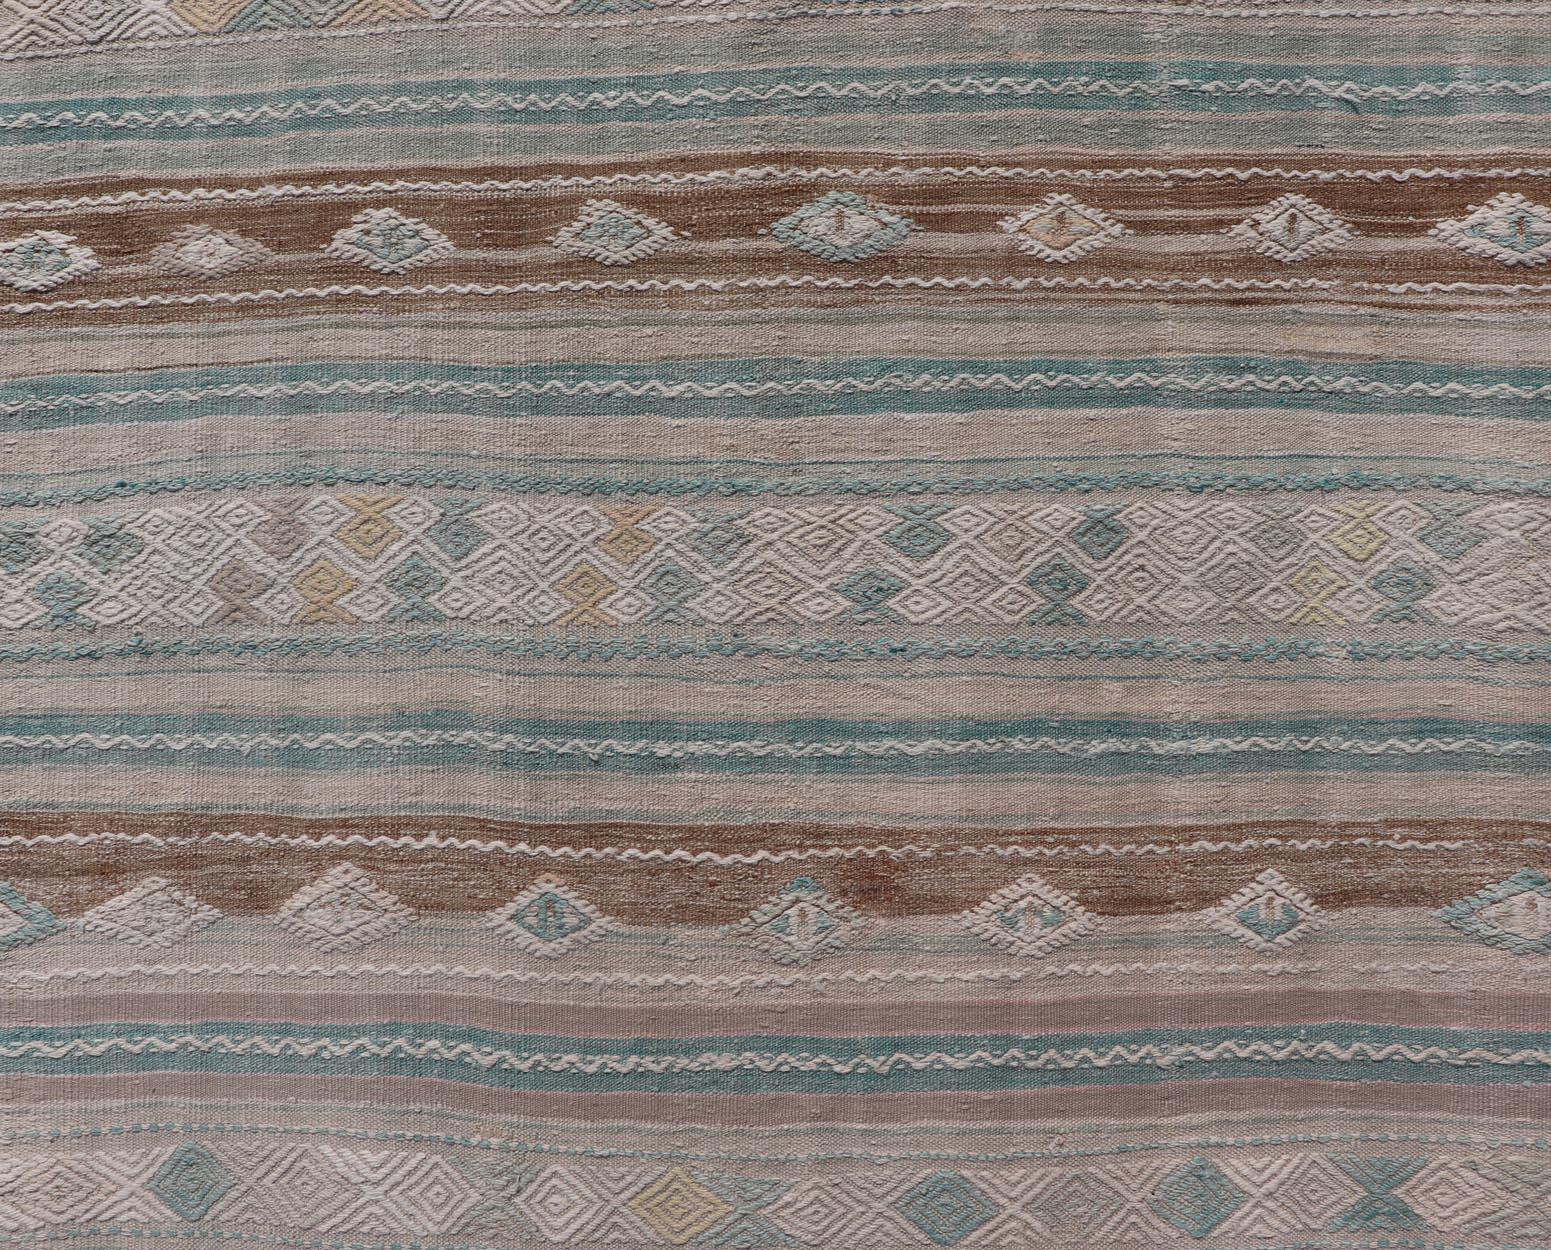 Wool Striped Turkish Hand Woven Flat-Weave Kilim in Muted Colors and Tribal Motifs For Sale